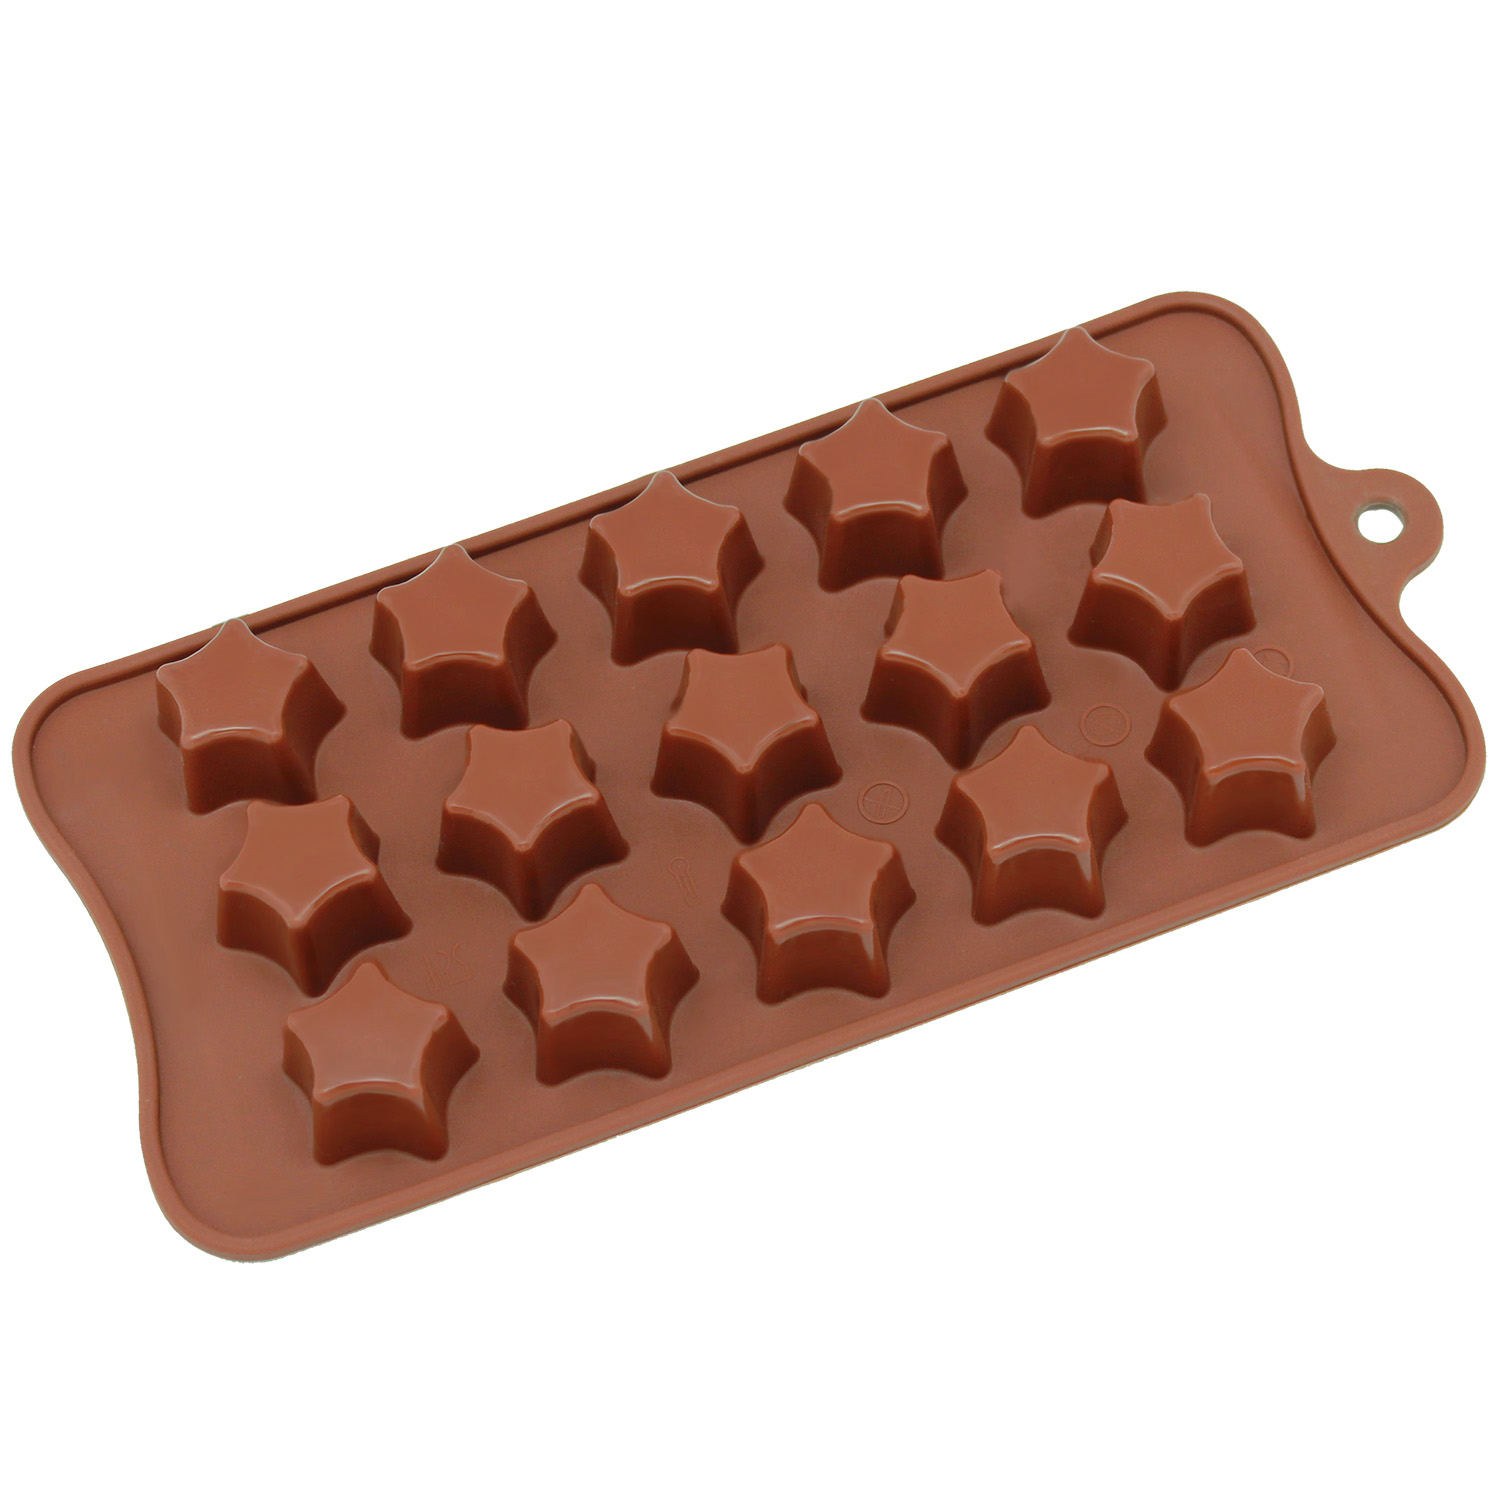 Freshware Silicone Mold, Chocolate Mold, Candy Mold, Ice Mold, Soap Mold for Chocolate, Candy and Gummy, Star, 15-Cavity